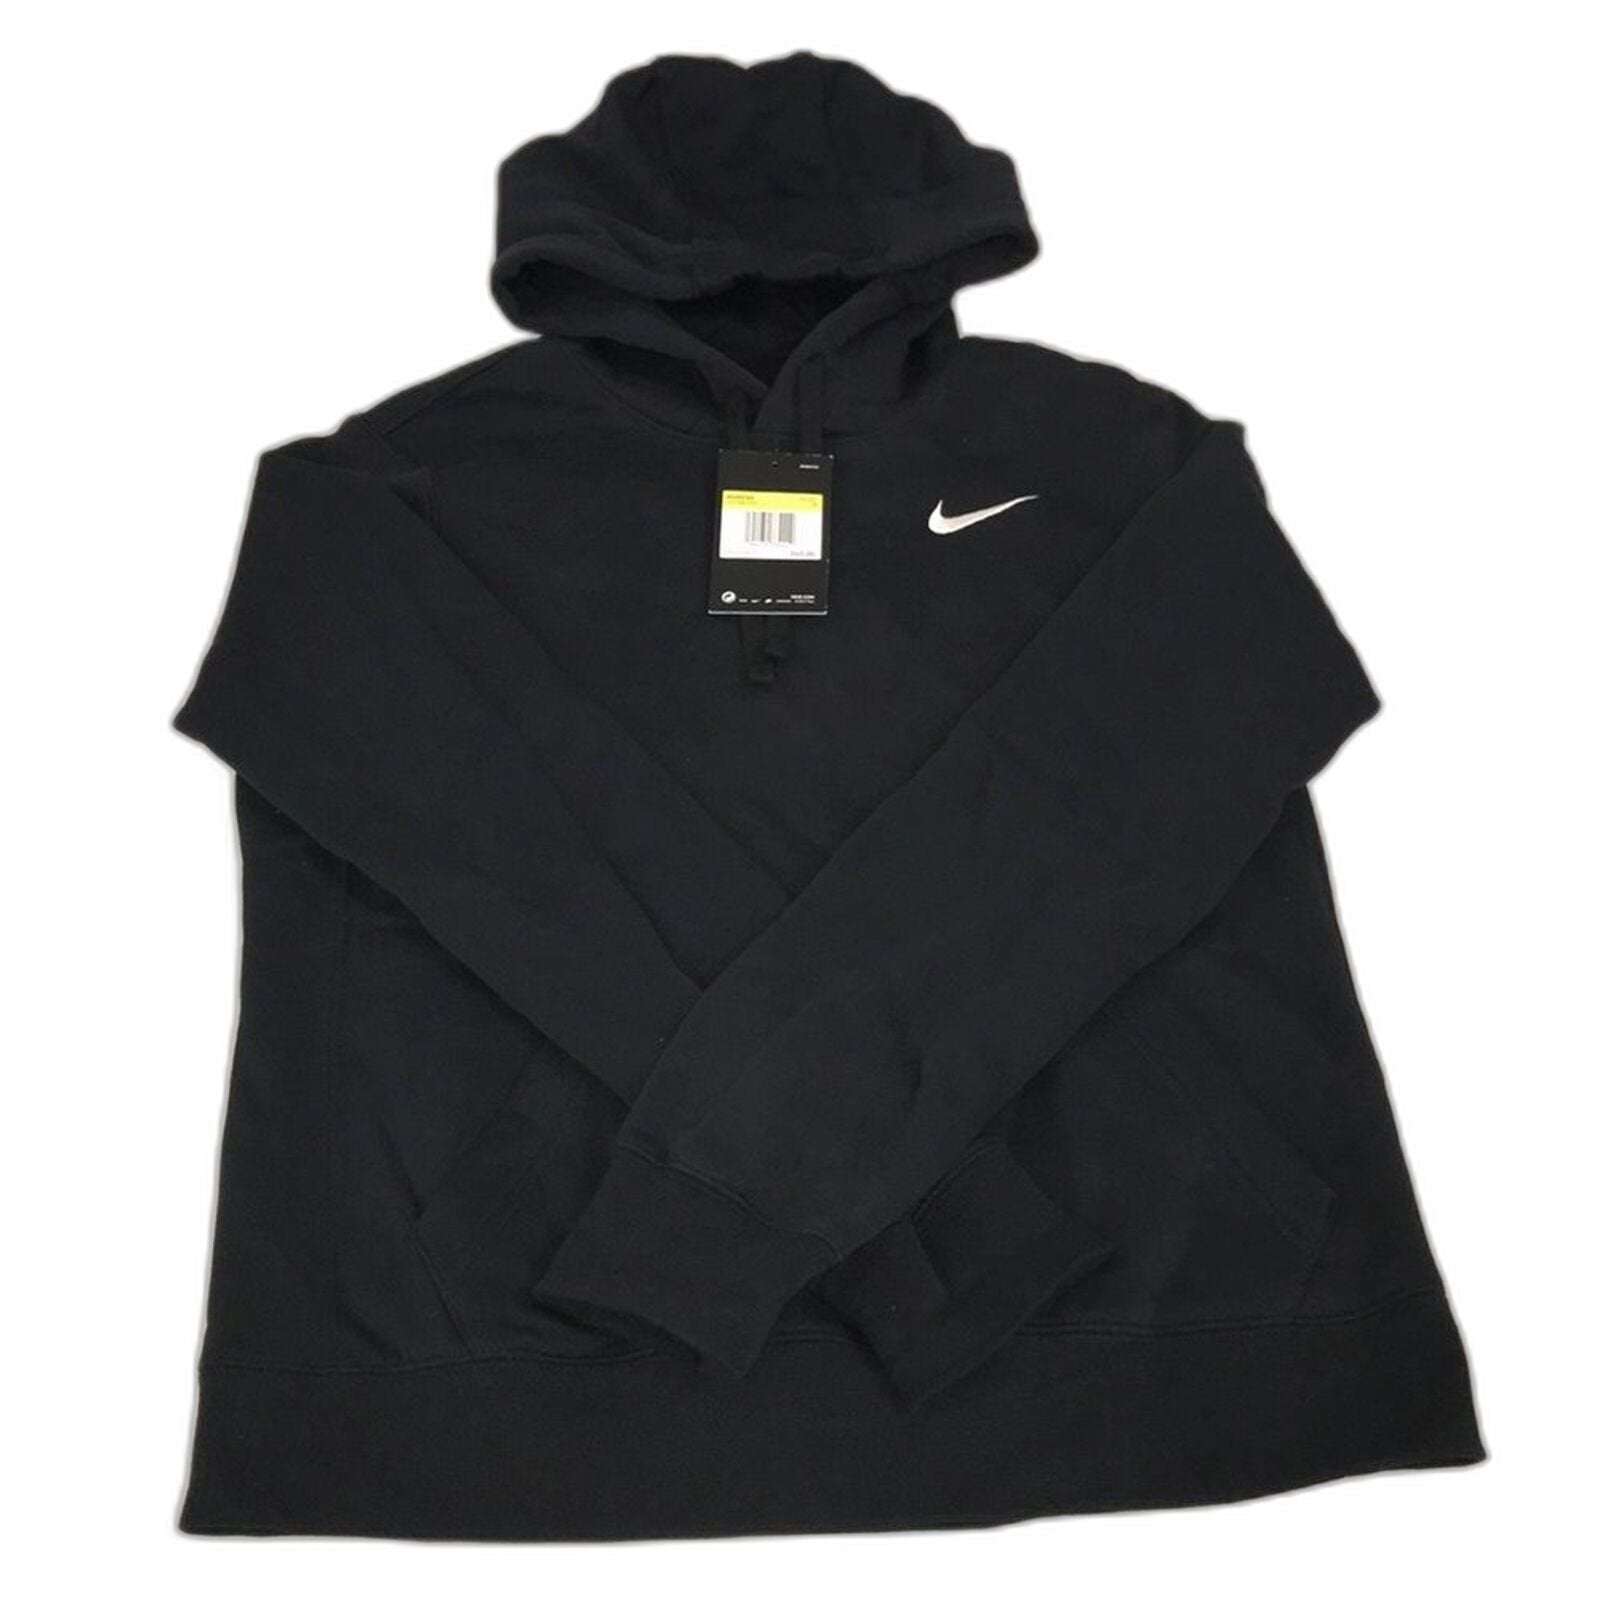 Nike Pullover Fleece Hoodie Black Womens Size Small S